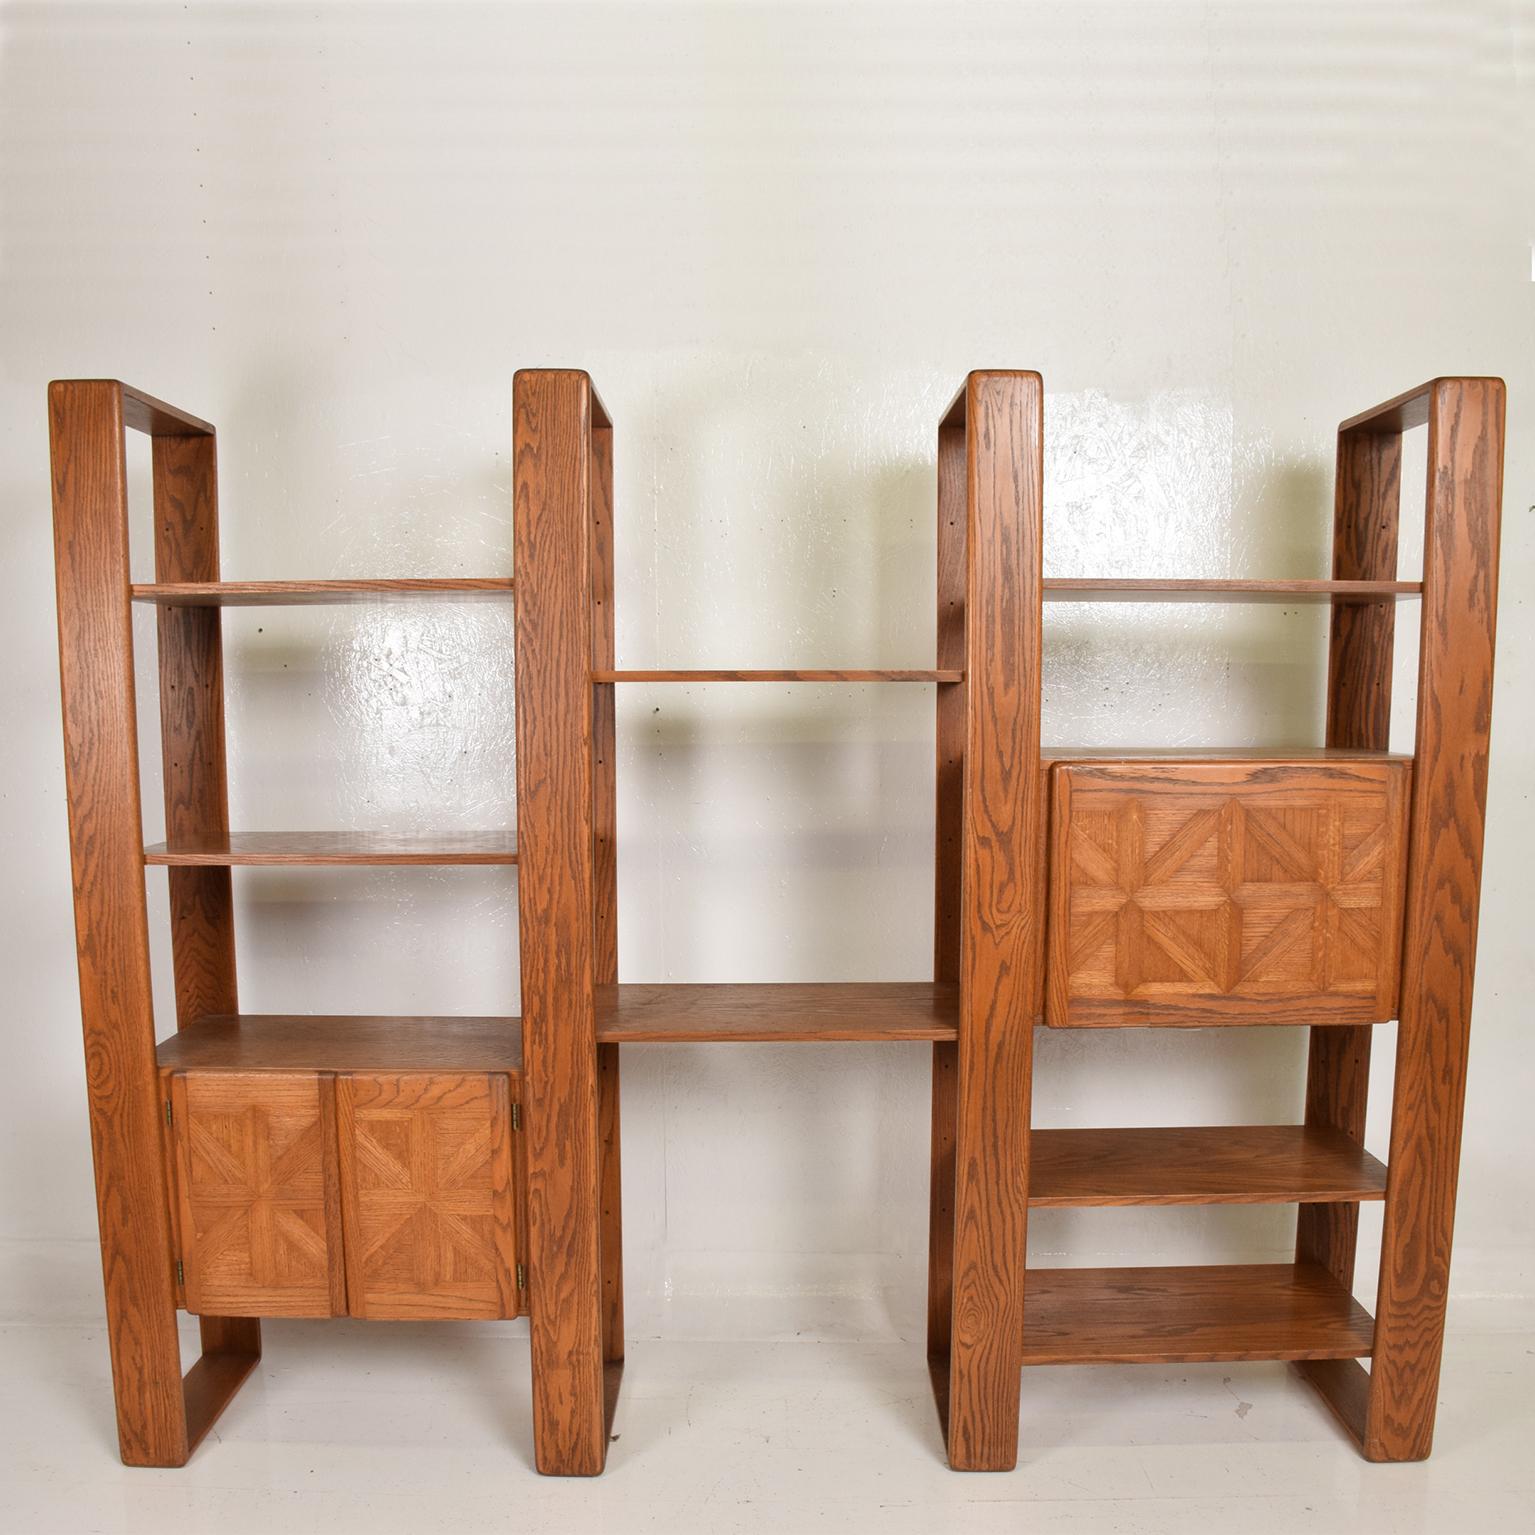 American Mid-Century Modern Solid Oak Wood Wall Unit by Lou Hodges